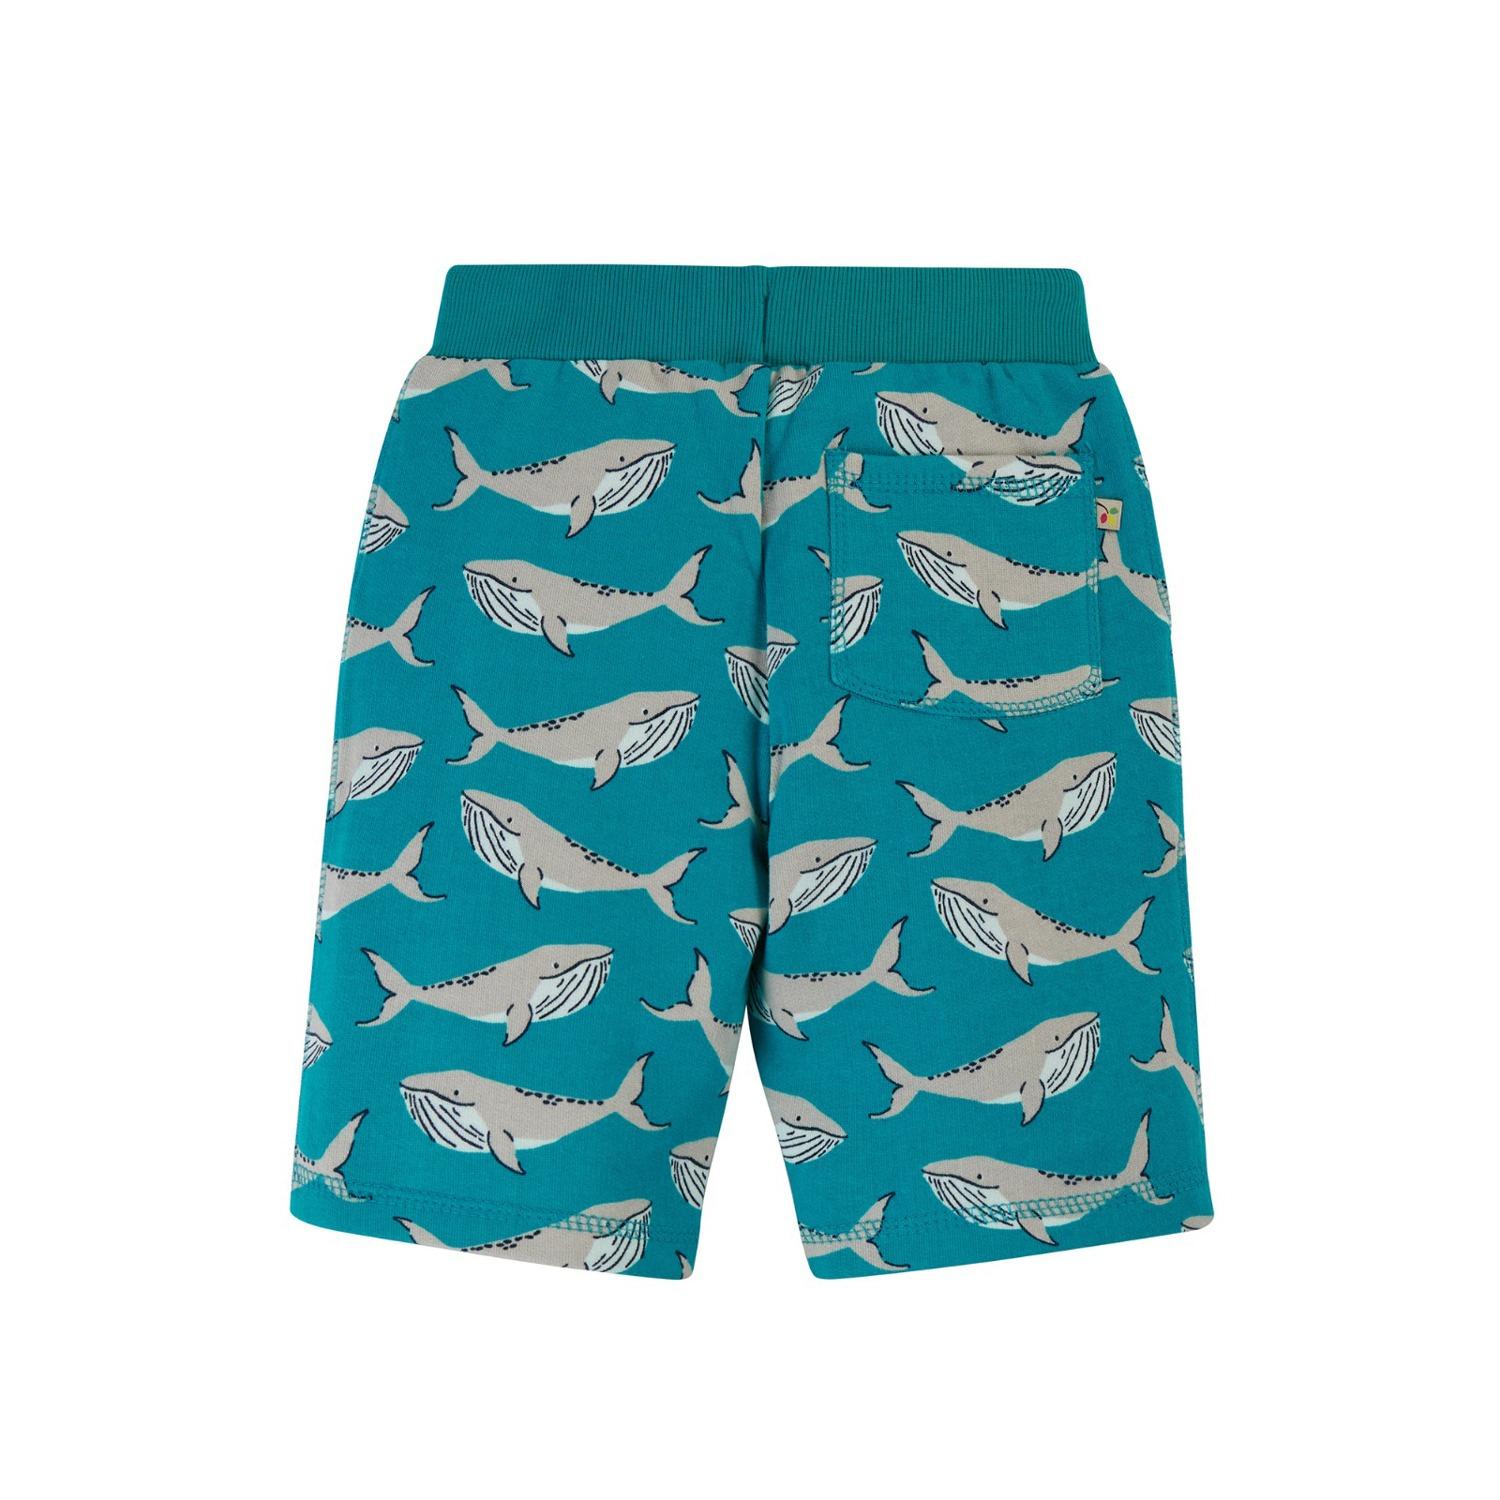 samson printed shorts camper whales back by frugi SS23